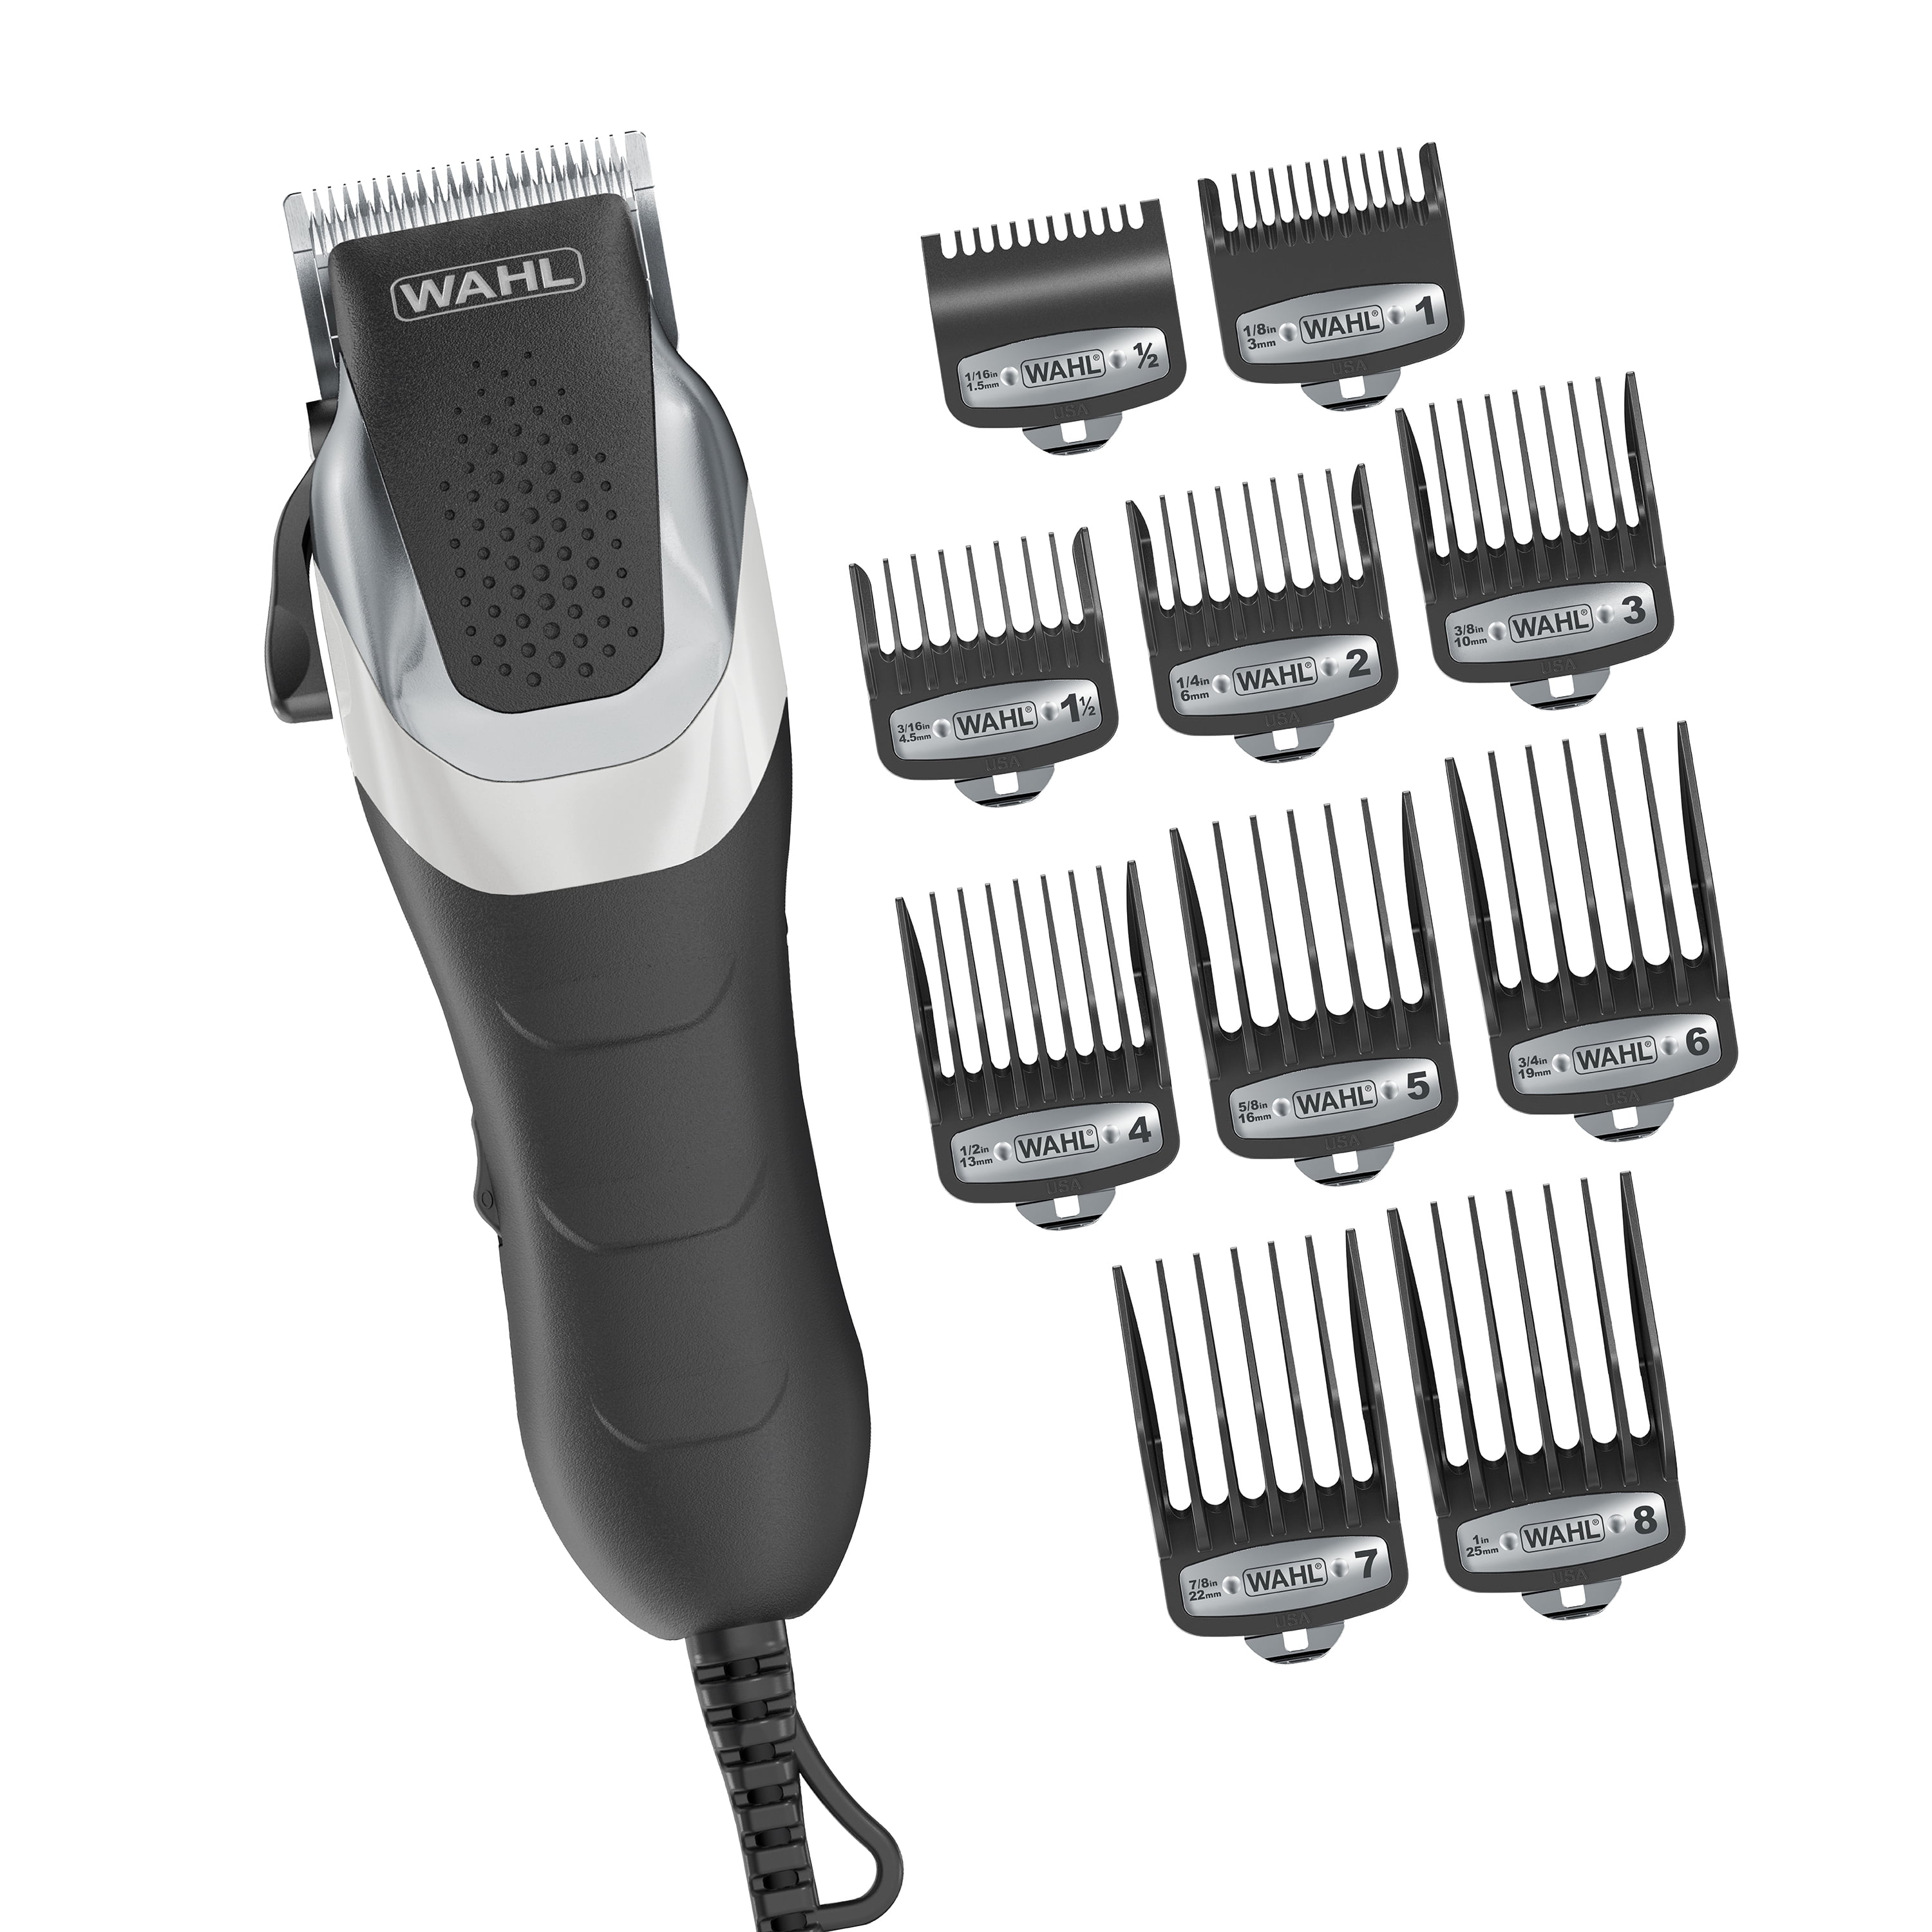 Fitness Knurre prangende Wahl Pro Series Elite Clipper Haircutting Kit, Great for Men, Women, and  Children's Hair Cuts, 79775 - Walmart.com